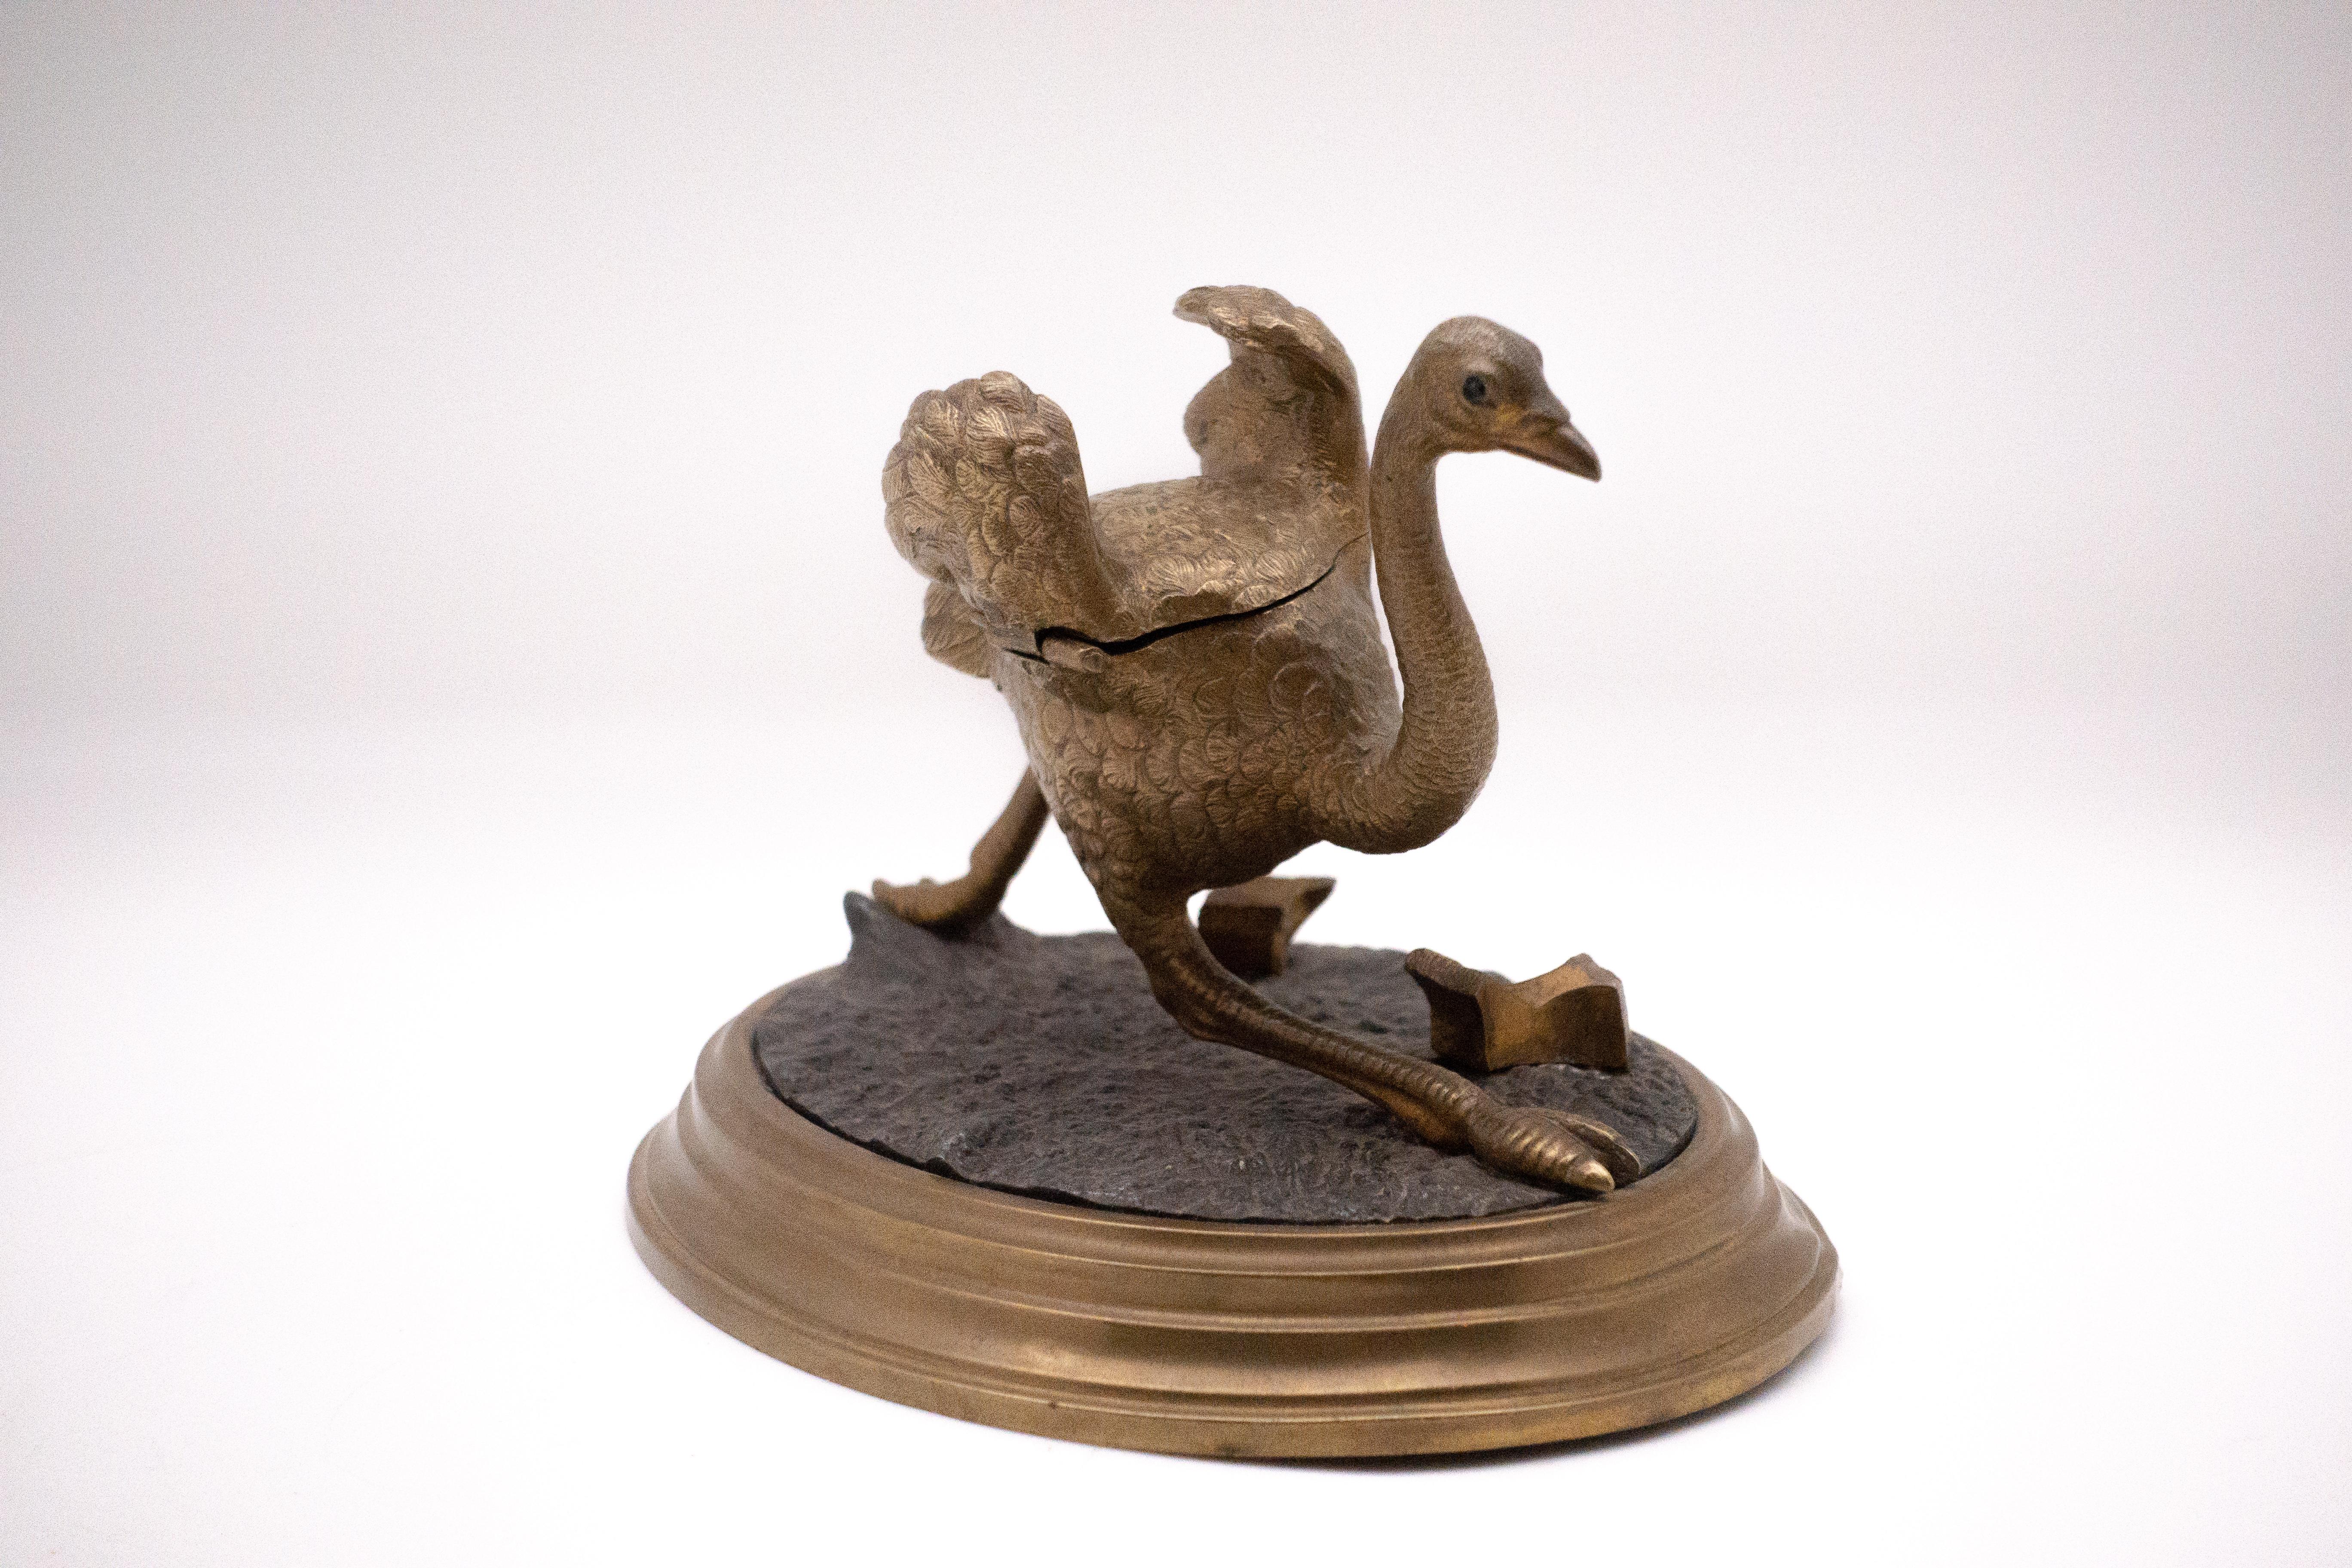 Late 19th century ostrich in motion inkwell. Two stones in bronze serve as the quill holder and top opens but the porcelain ink pot is missing.